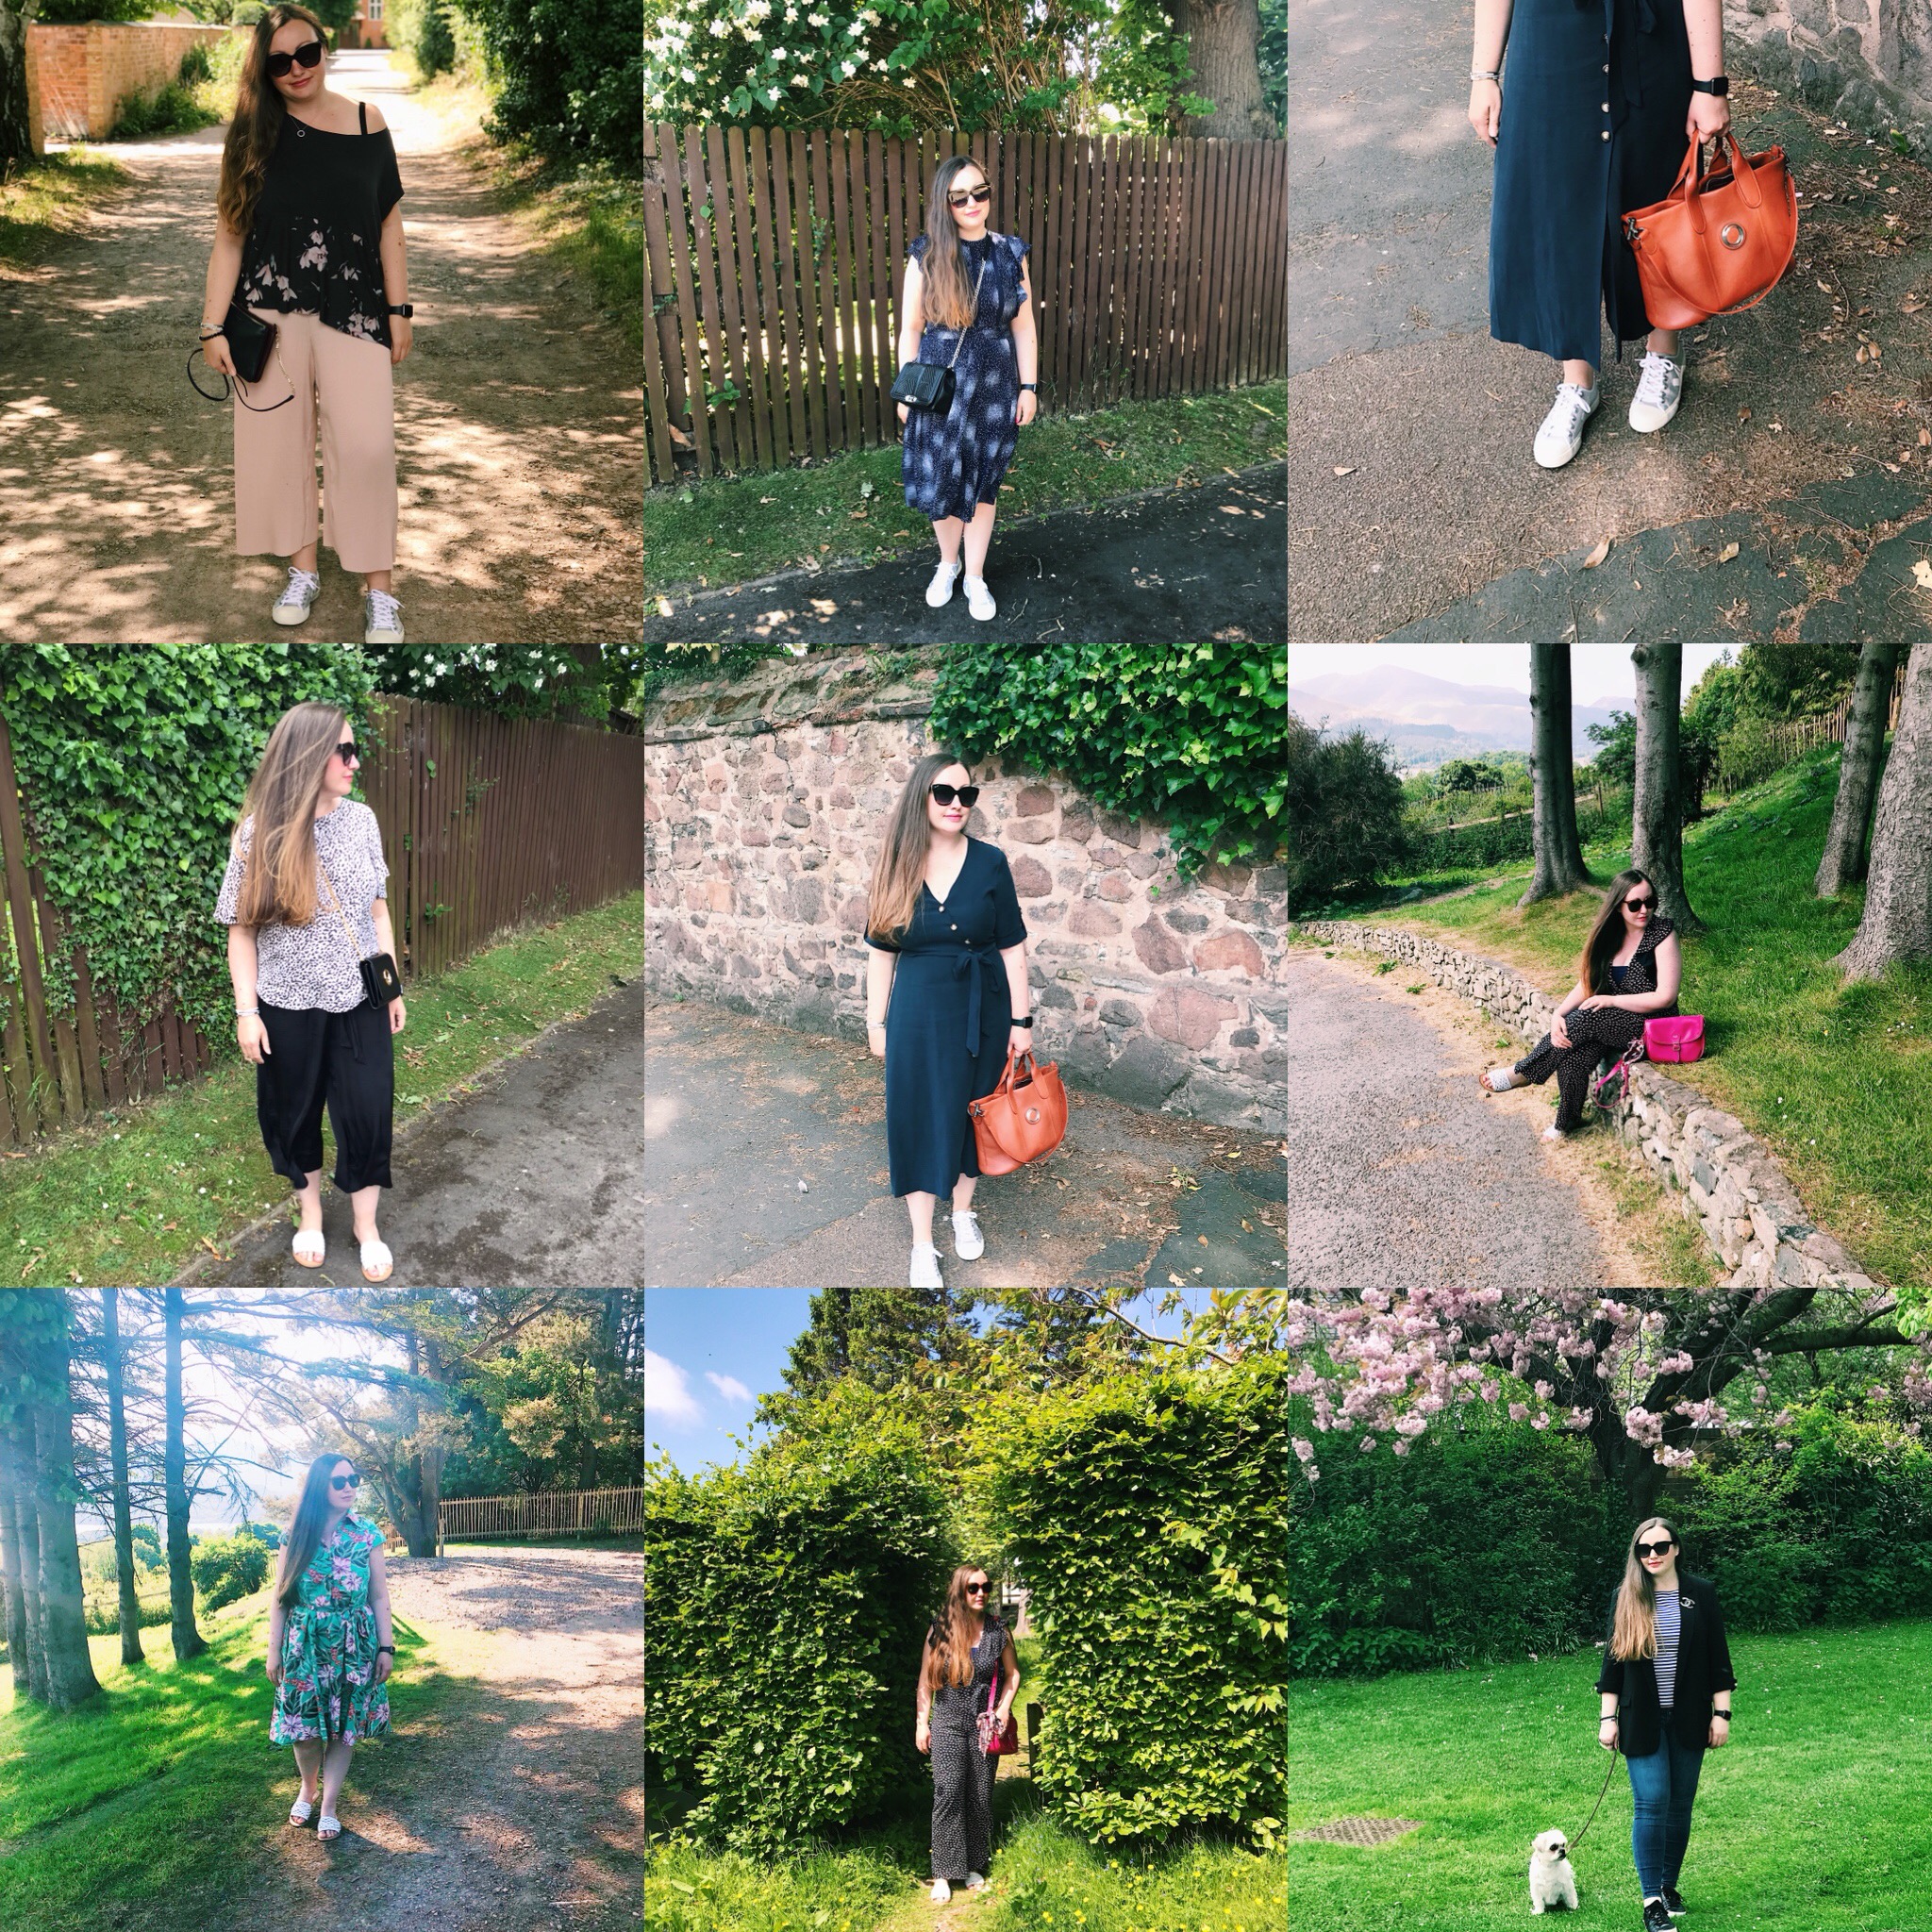 Instagram outfits roundup